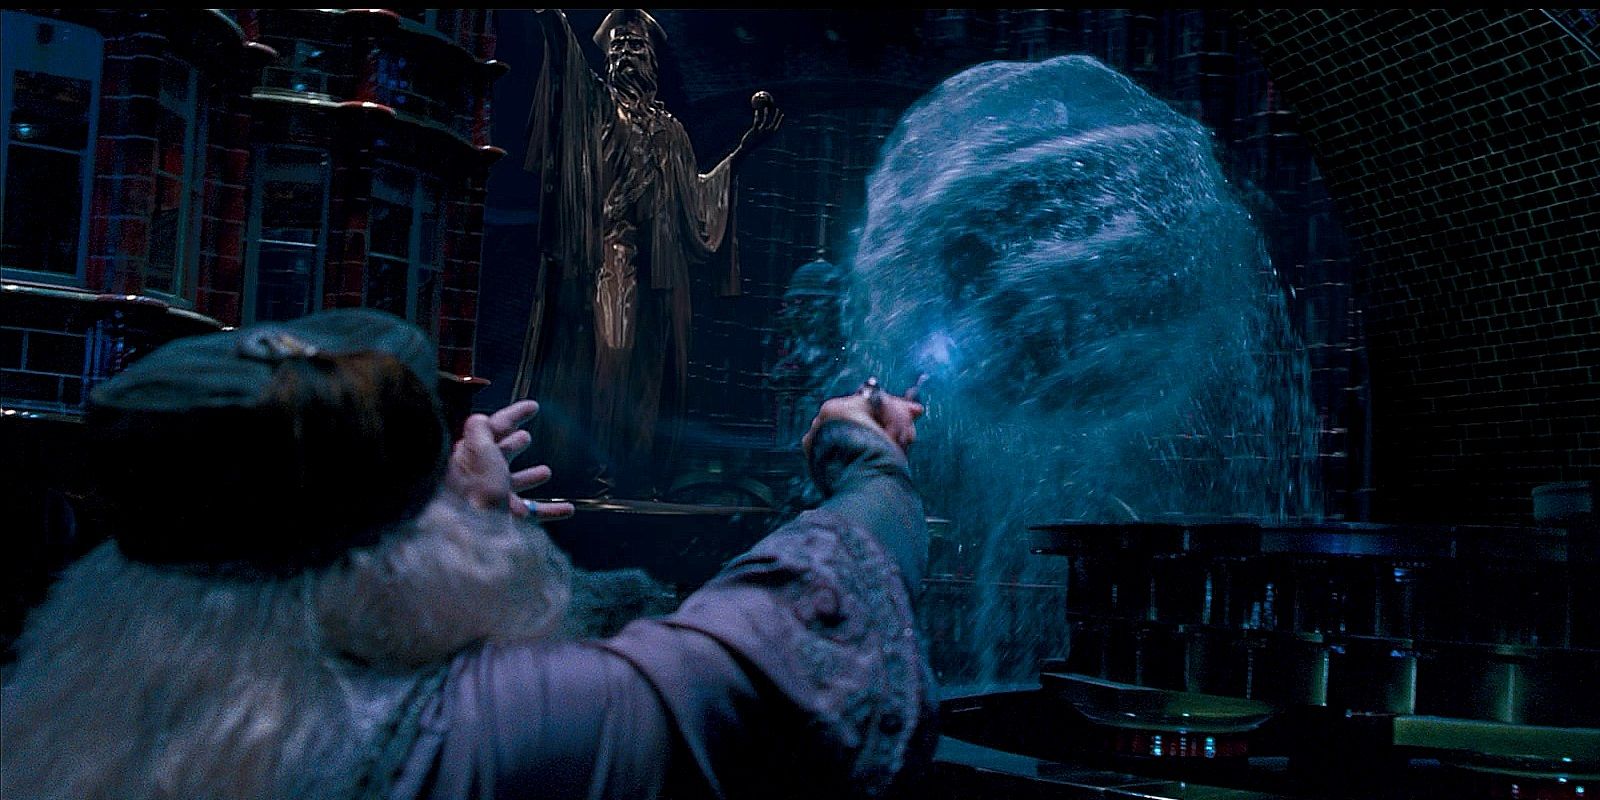 dumbledore battles voldemort and uses Water Manipulation Spell